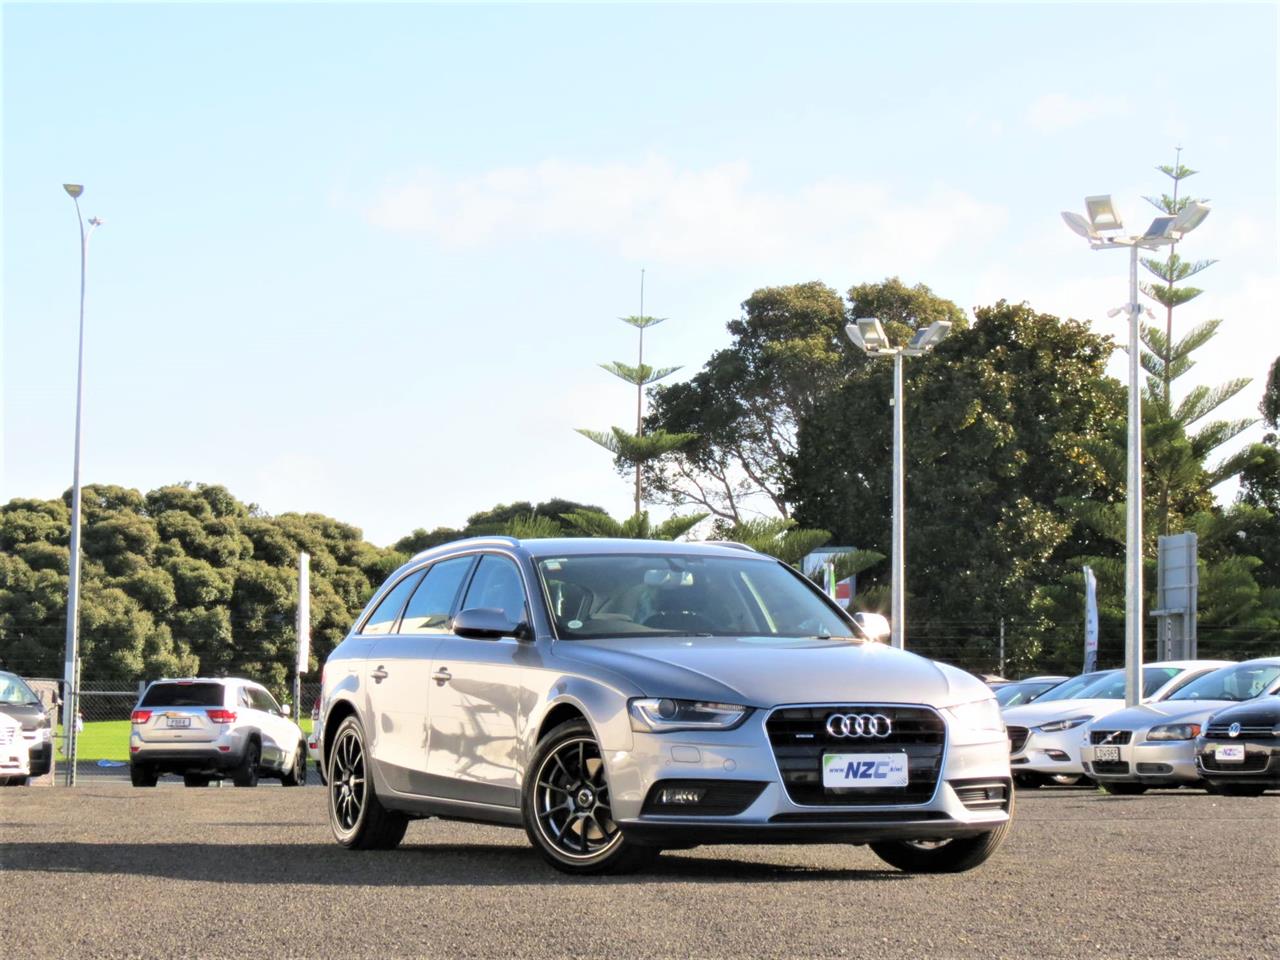 NZC 2014 Audi A4 just arrived to Auckland